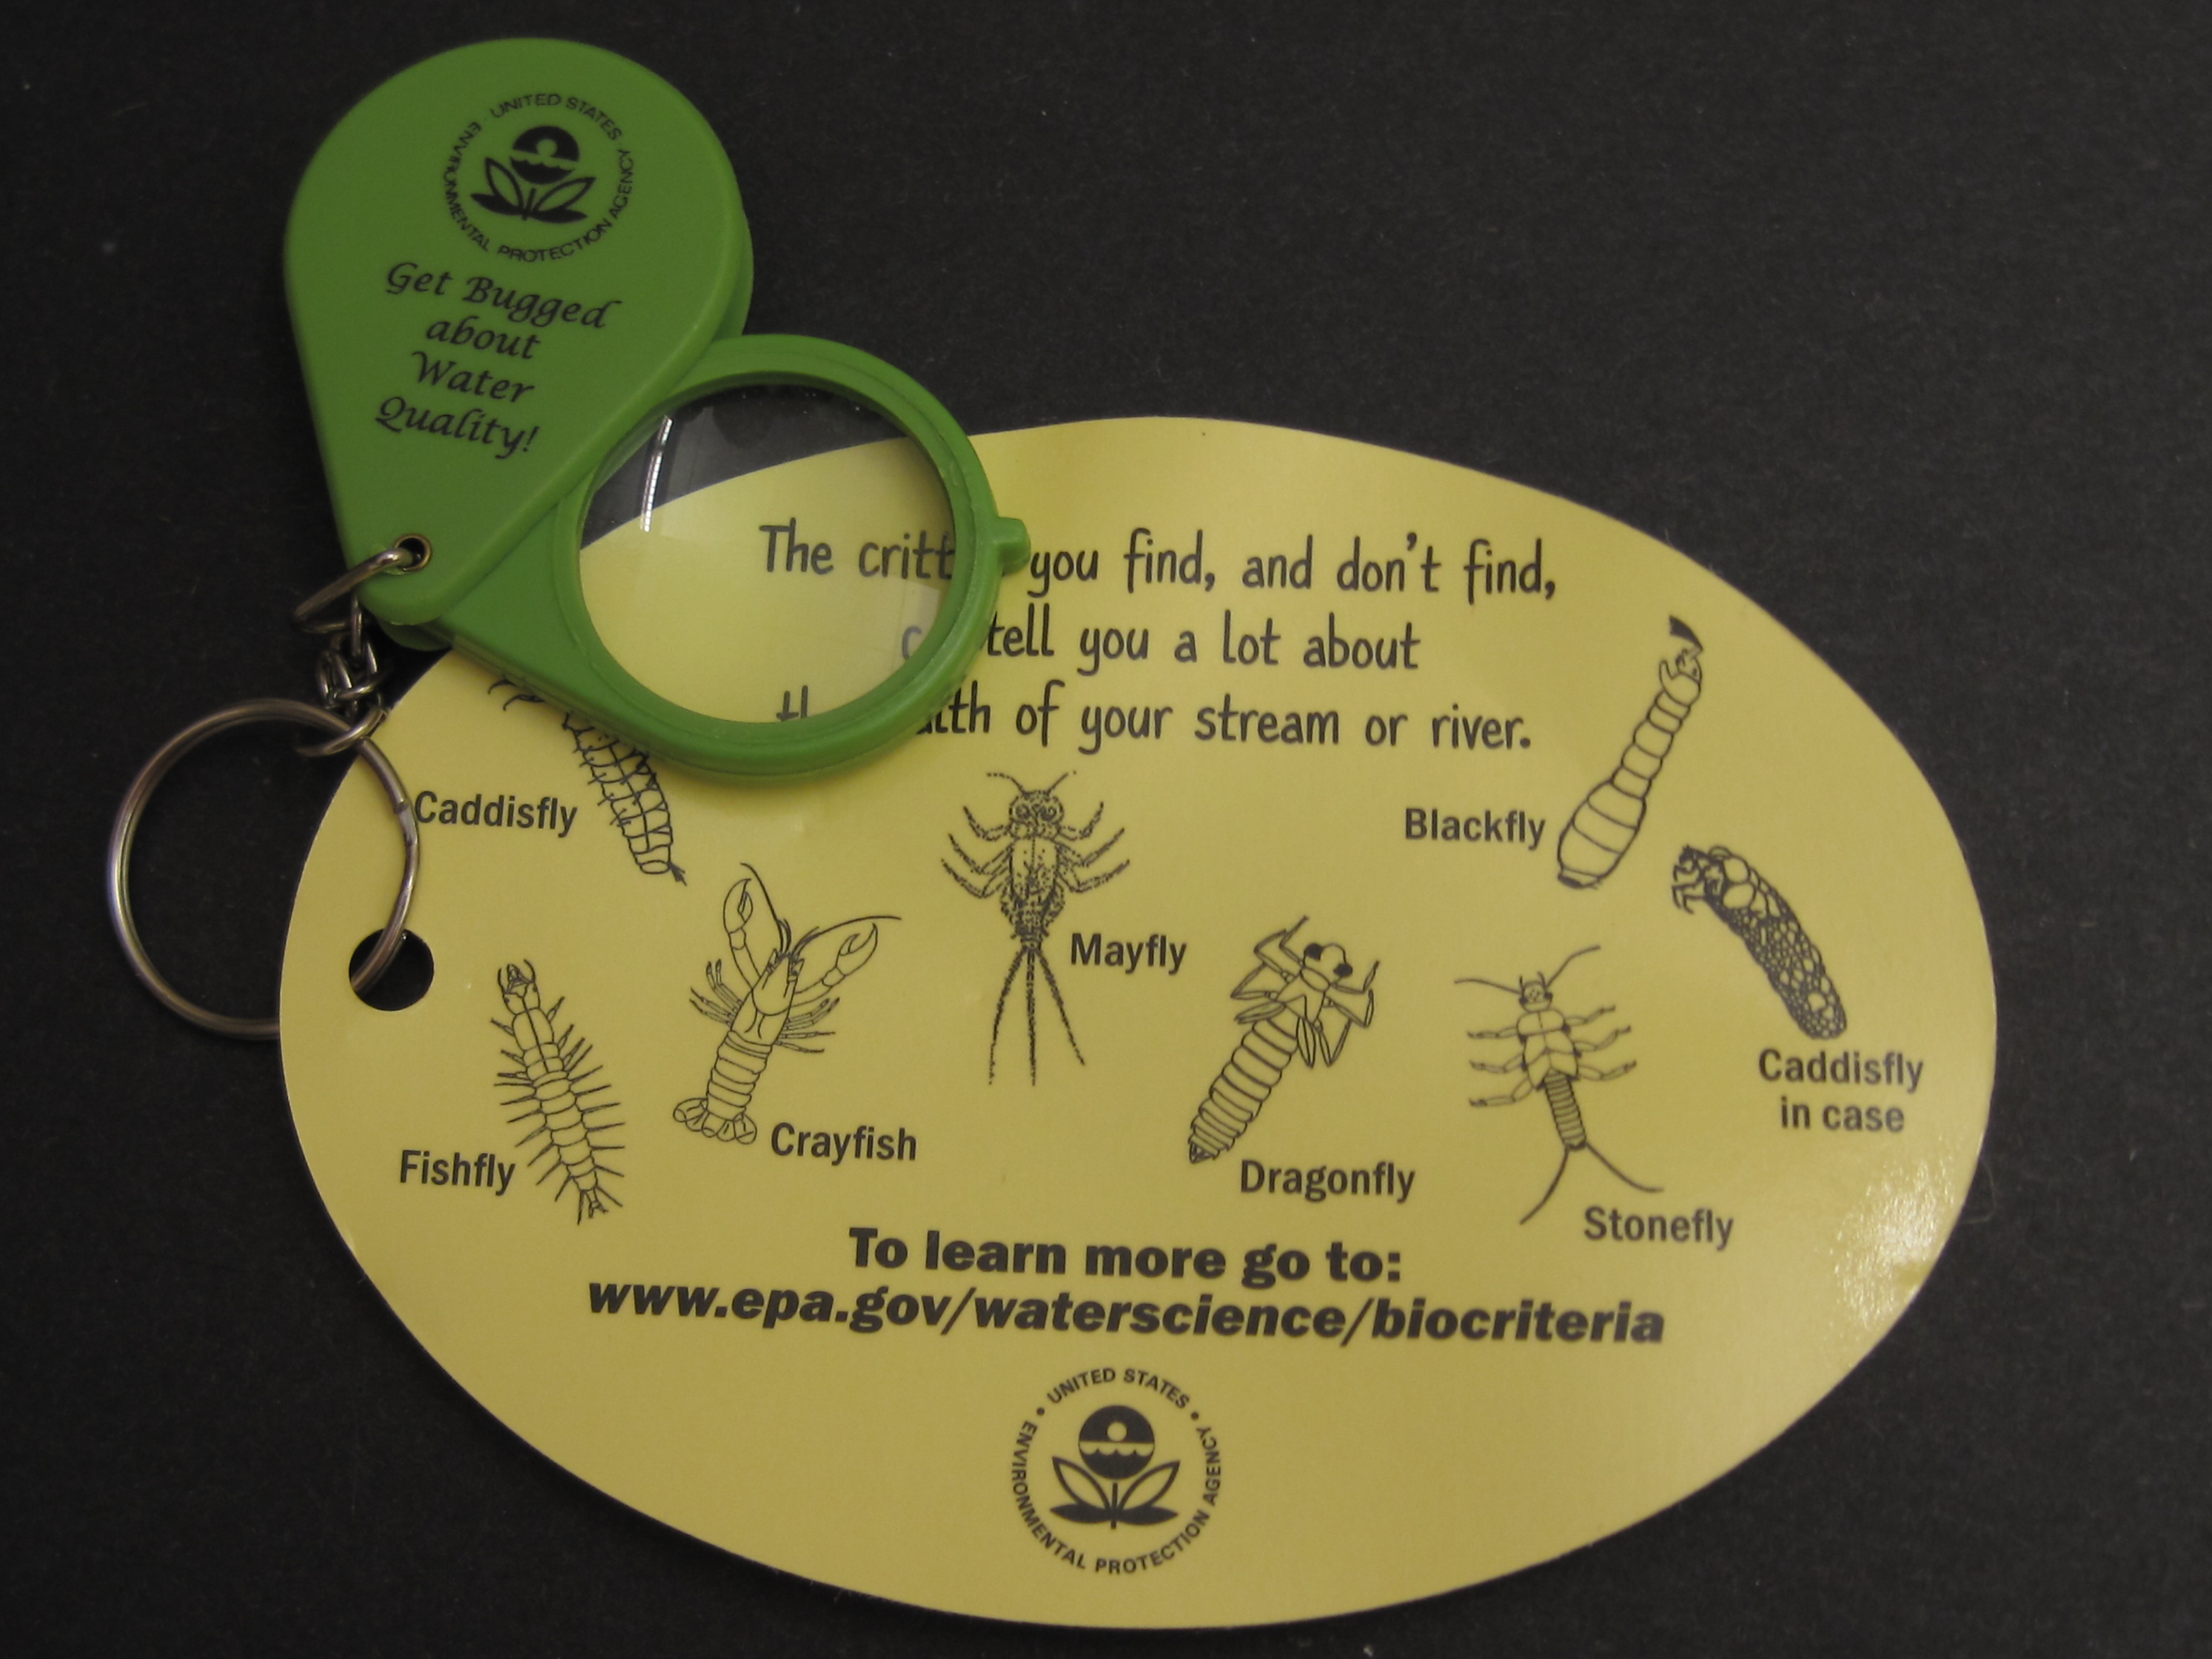 Magnifying glass and card with pictures of macroinvertebrates that helps people look for the critters under rocks in streams